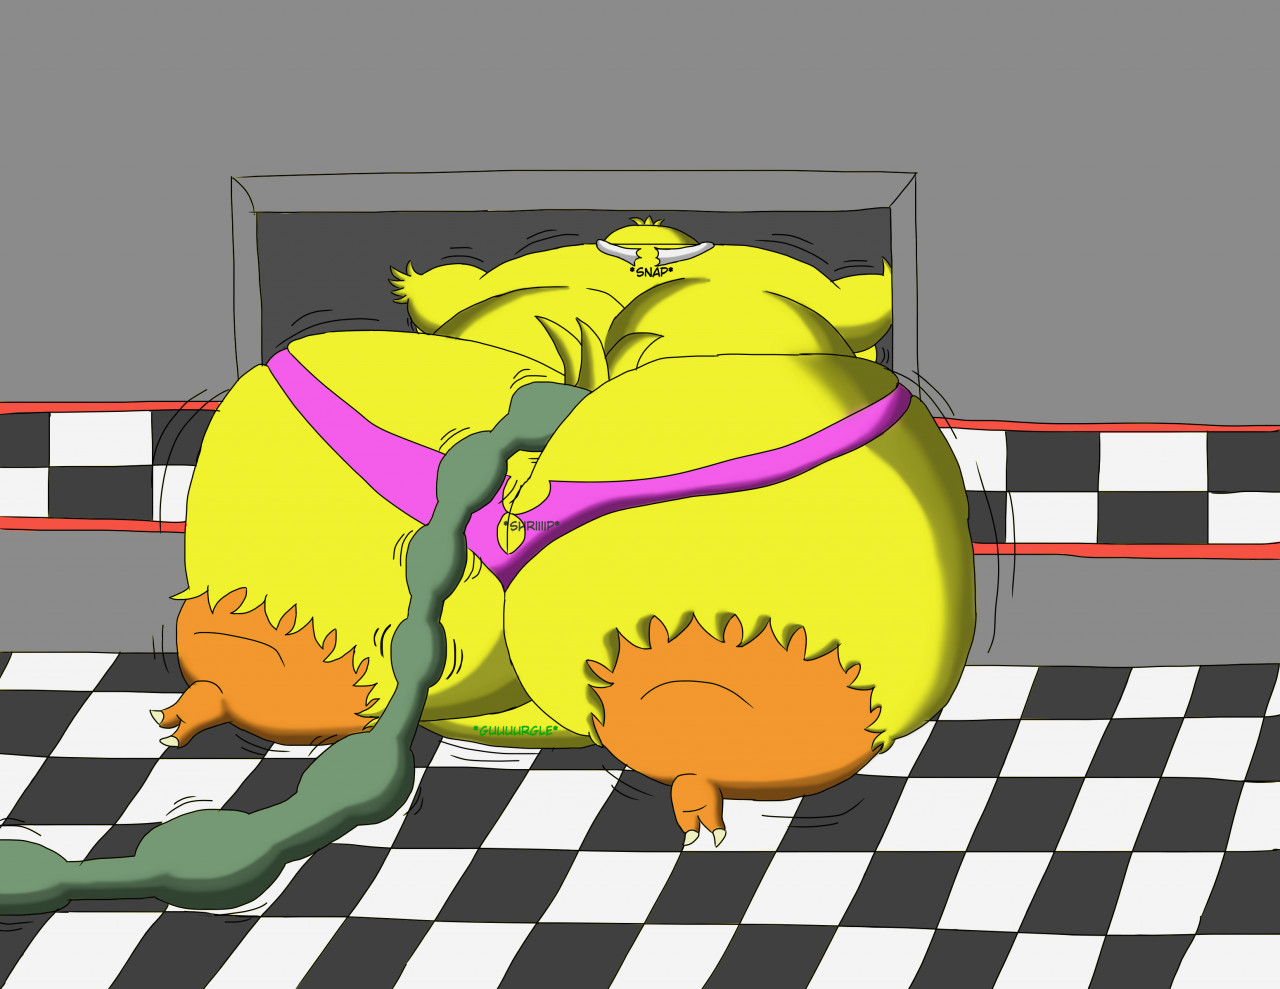 Toy chica inflation